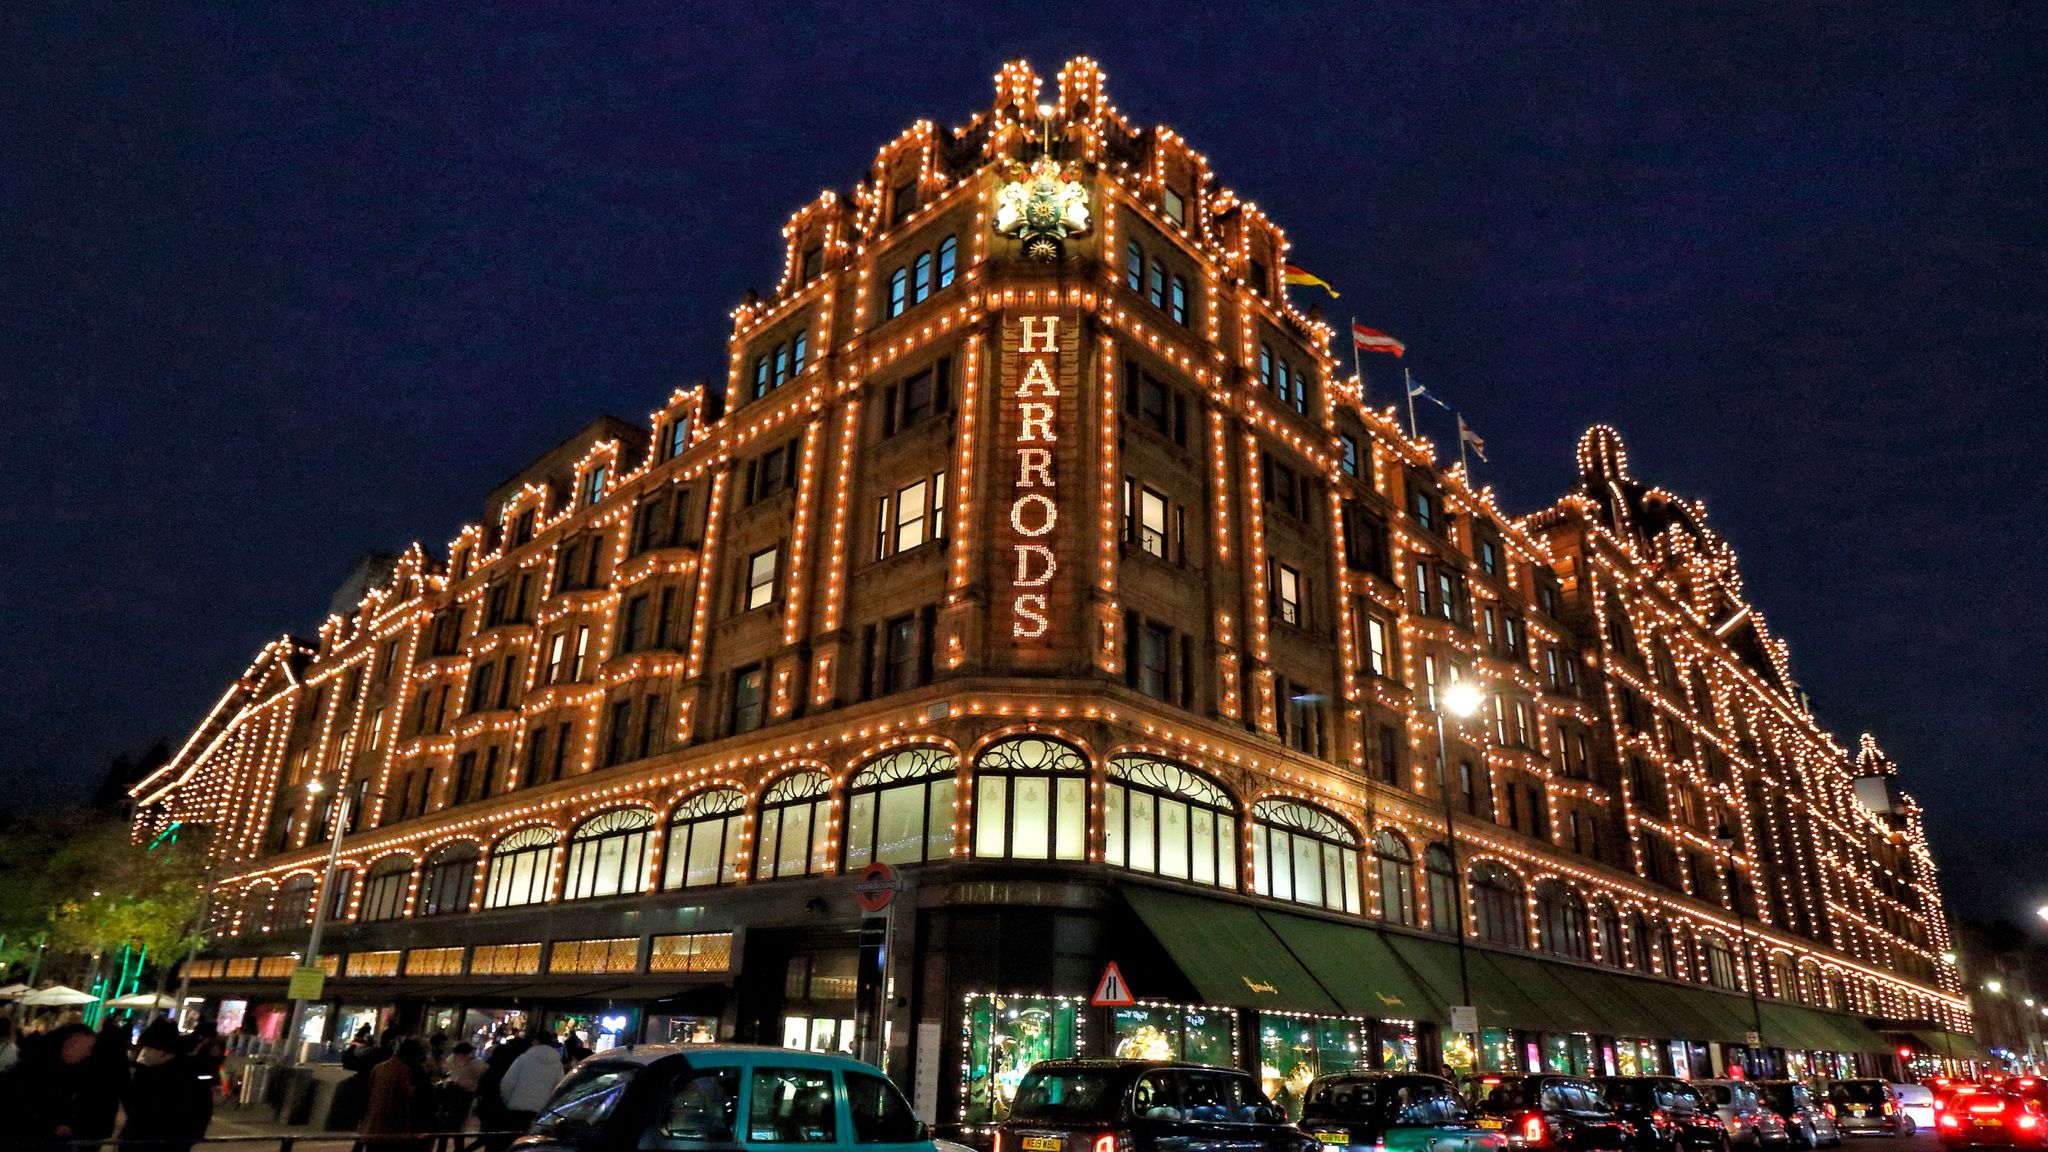 Harrods: Man stabbed during fight in London department store